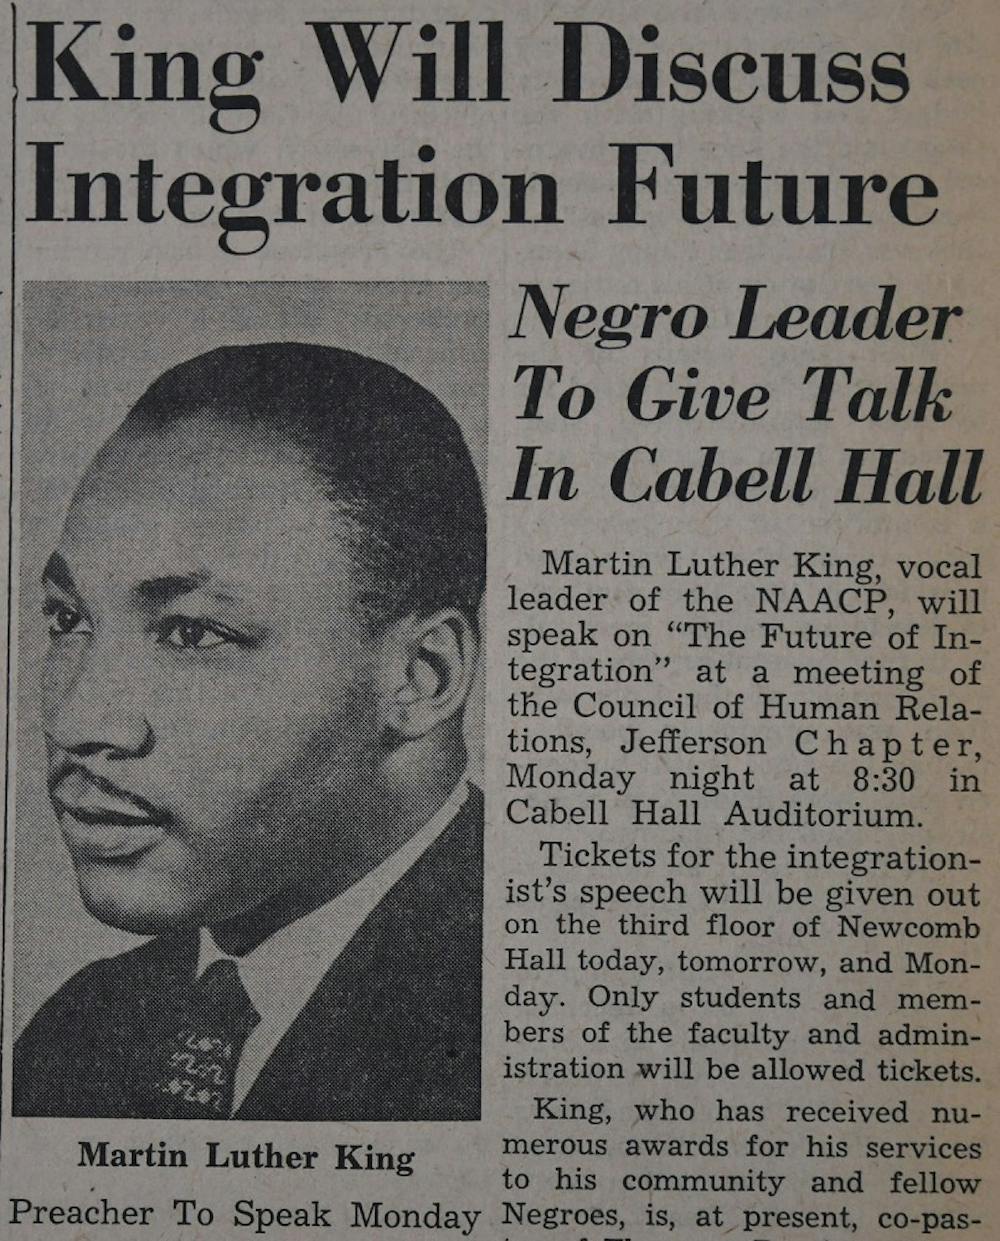 <p>Photo taken from The&nbsp;Cavalier Daily archives dated&nbsp;March 21, 1963. This article was written in anticipation of King's visit to deliver a speech in the auditorium of Old Cabell Hall.</p>